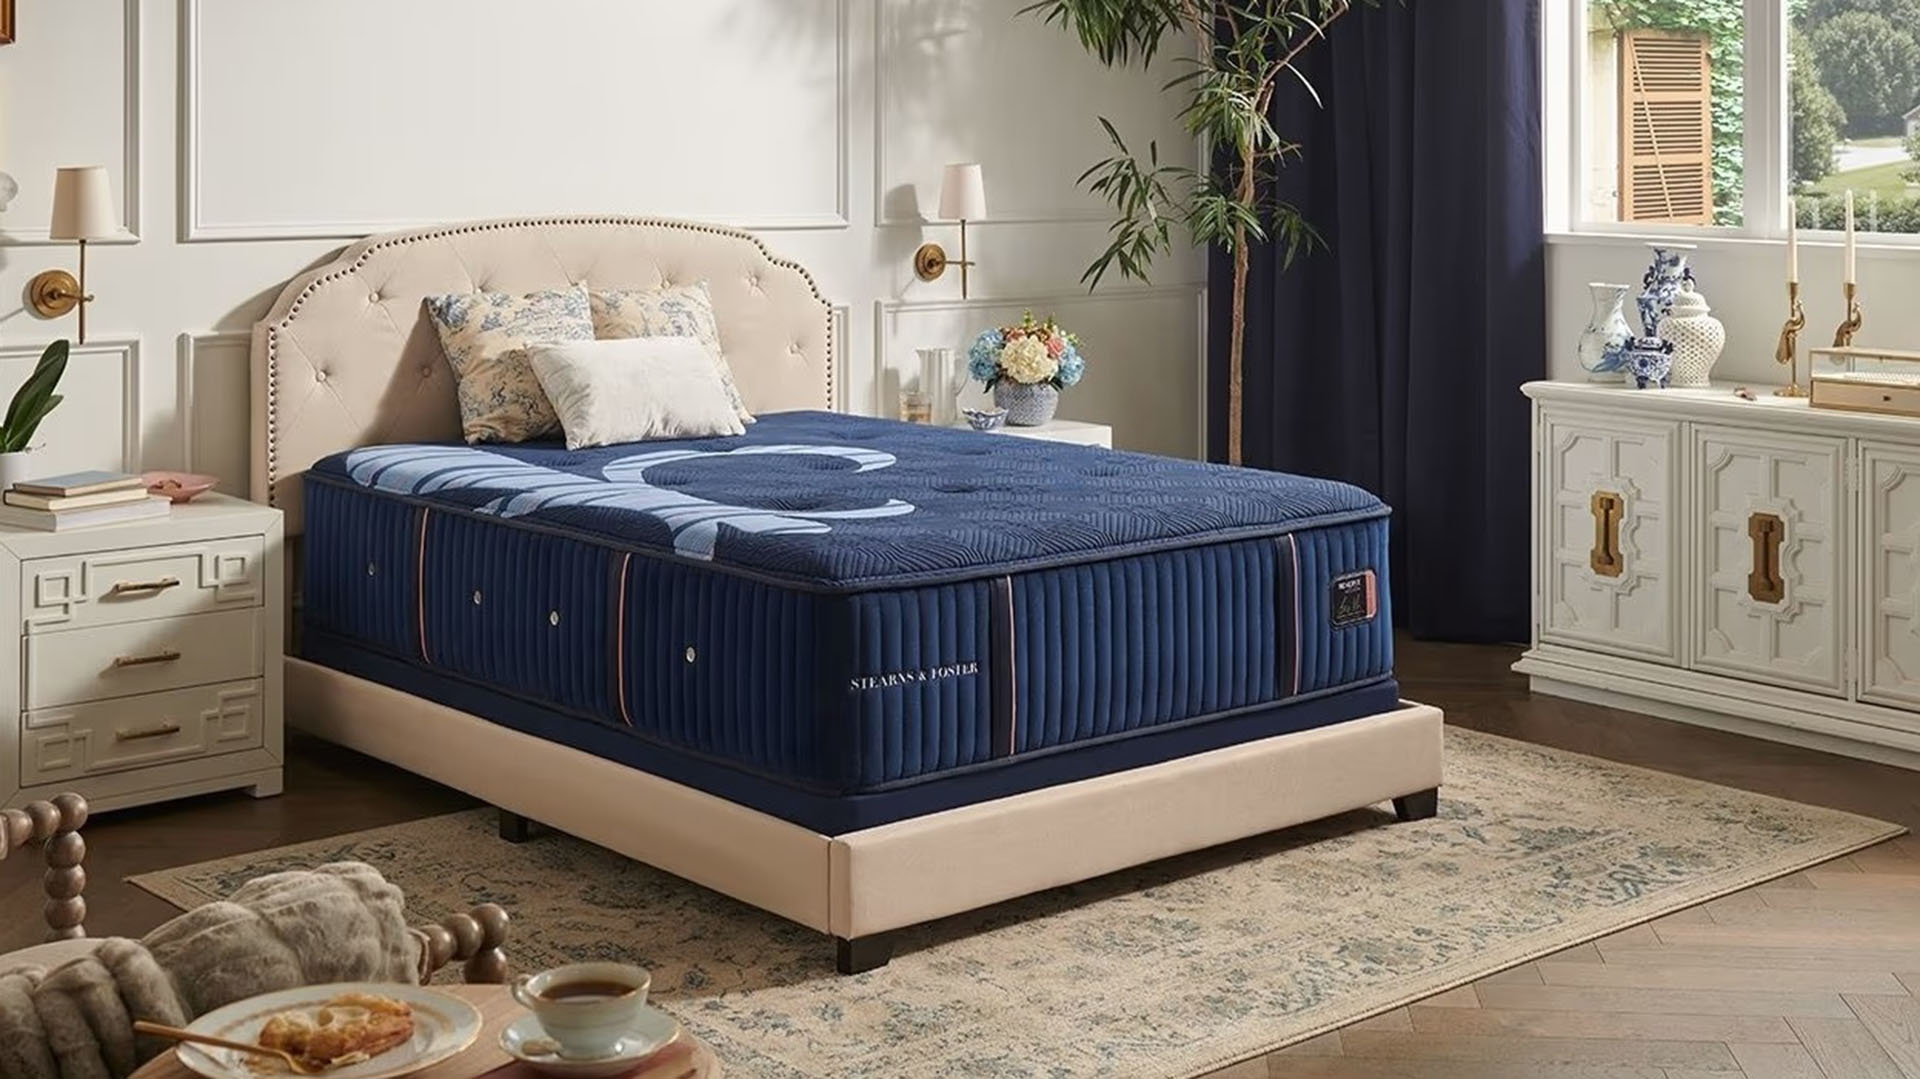 Stearns & Foster mattresses in Abilene are designed with comfort and support in mind.